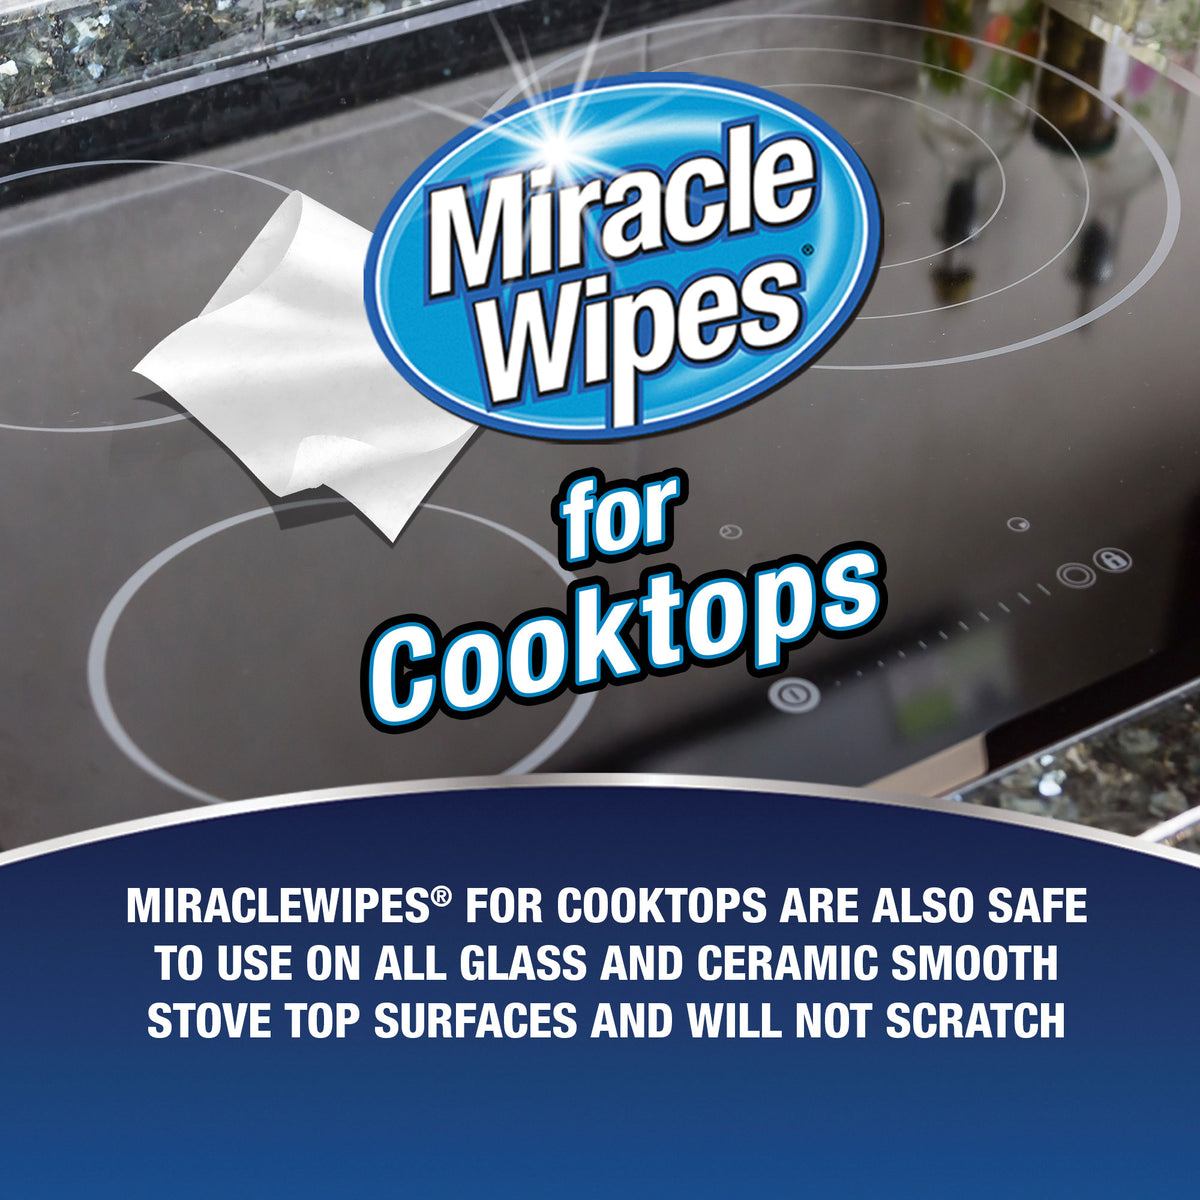 MiracleWipes for Stainless Steel – Miracle Brands